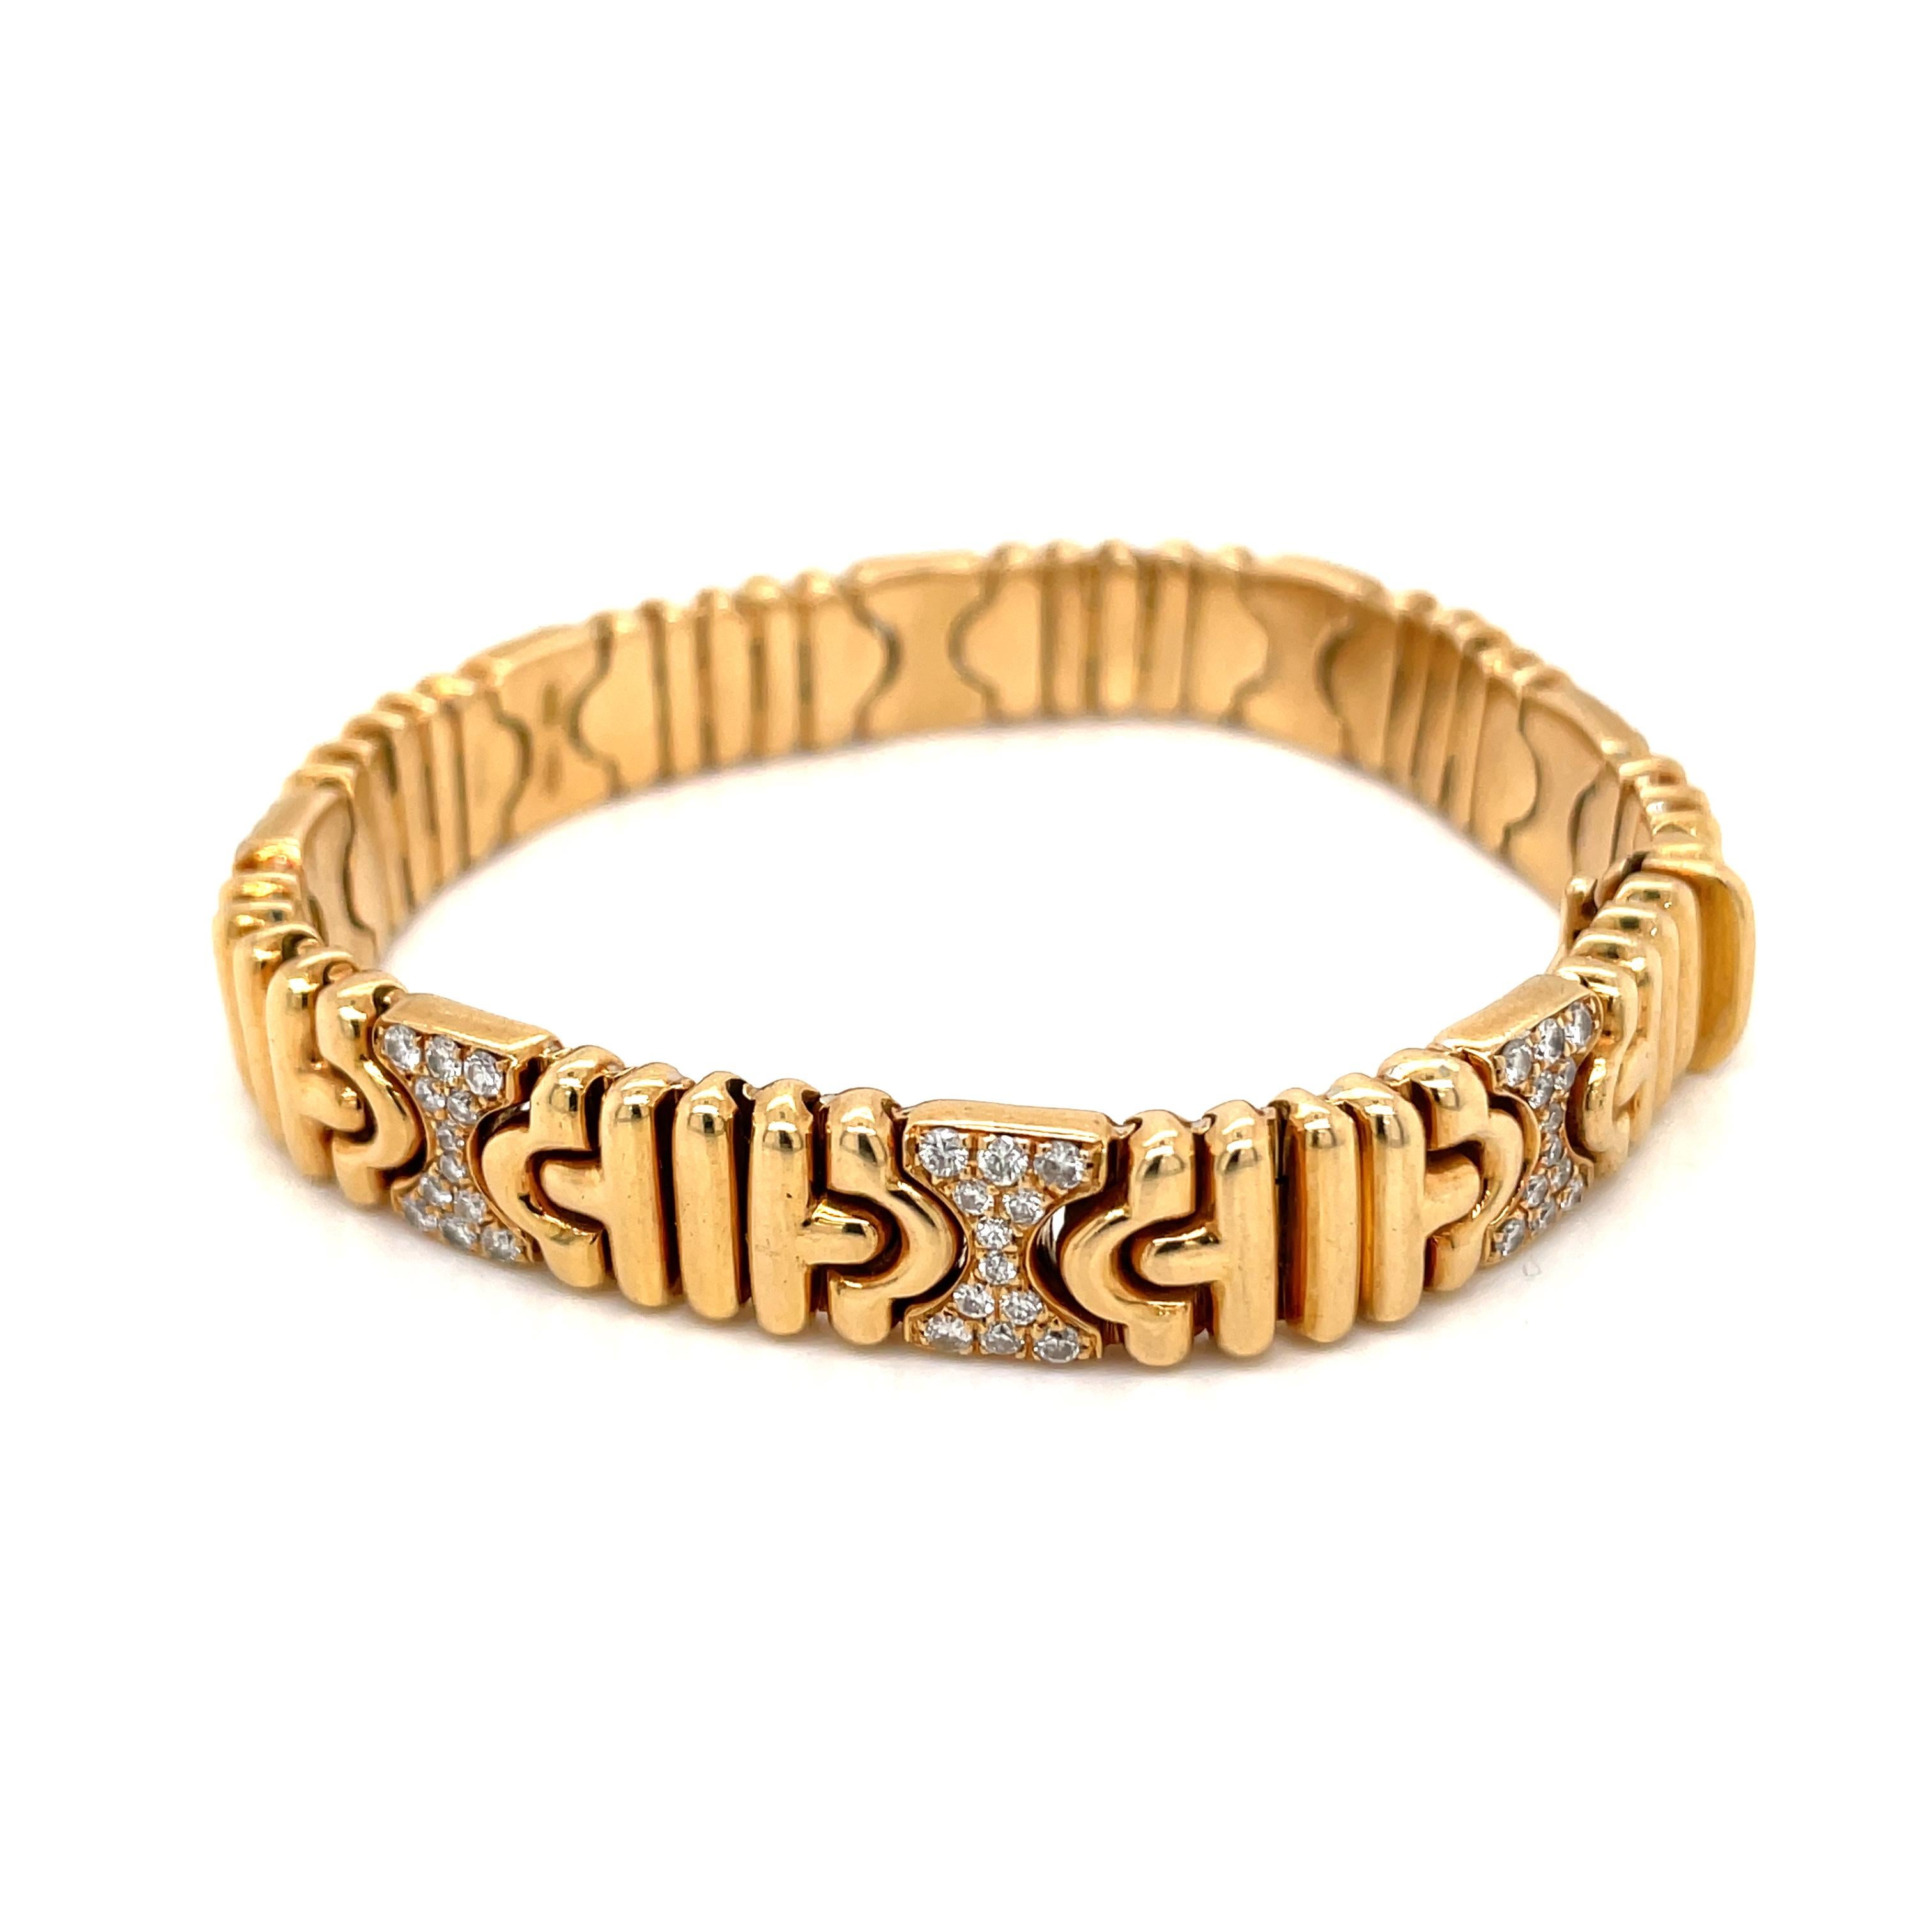 Iconic vintage Bulgari Parentesi 18 carat yellow gold bracelet is composed of sculpted geometric links set with colorless diamonds for a total weight of 1.50 carats, graded E/F color IF

Has a total weight of 39 grams. The actual size is 17,5 cm